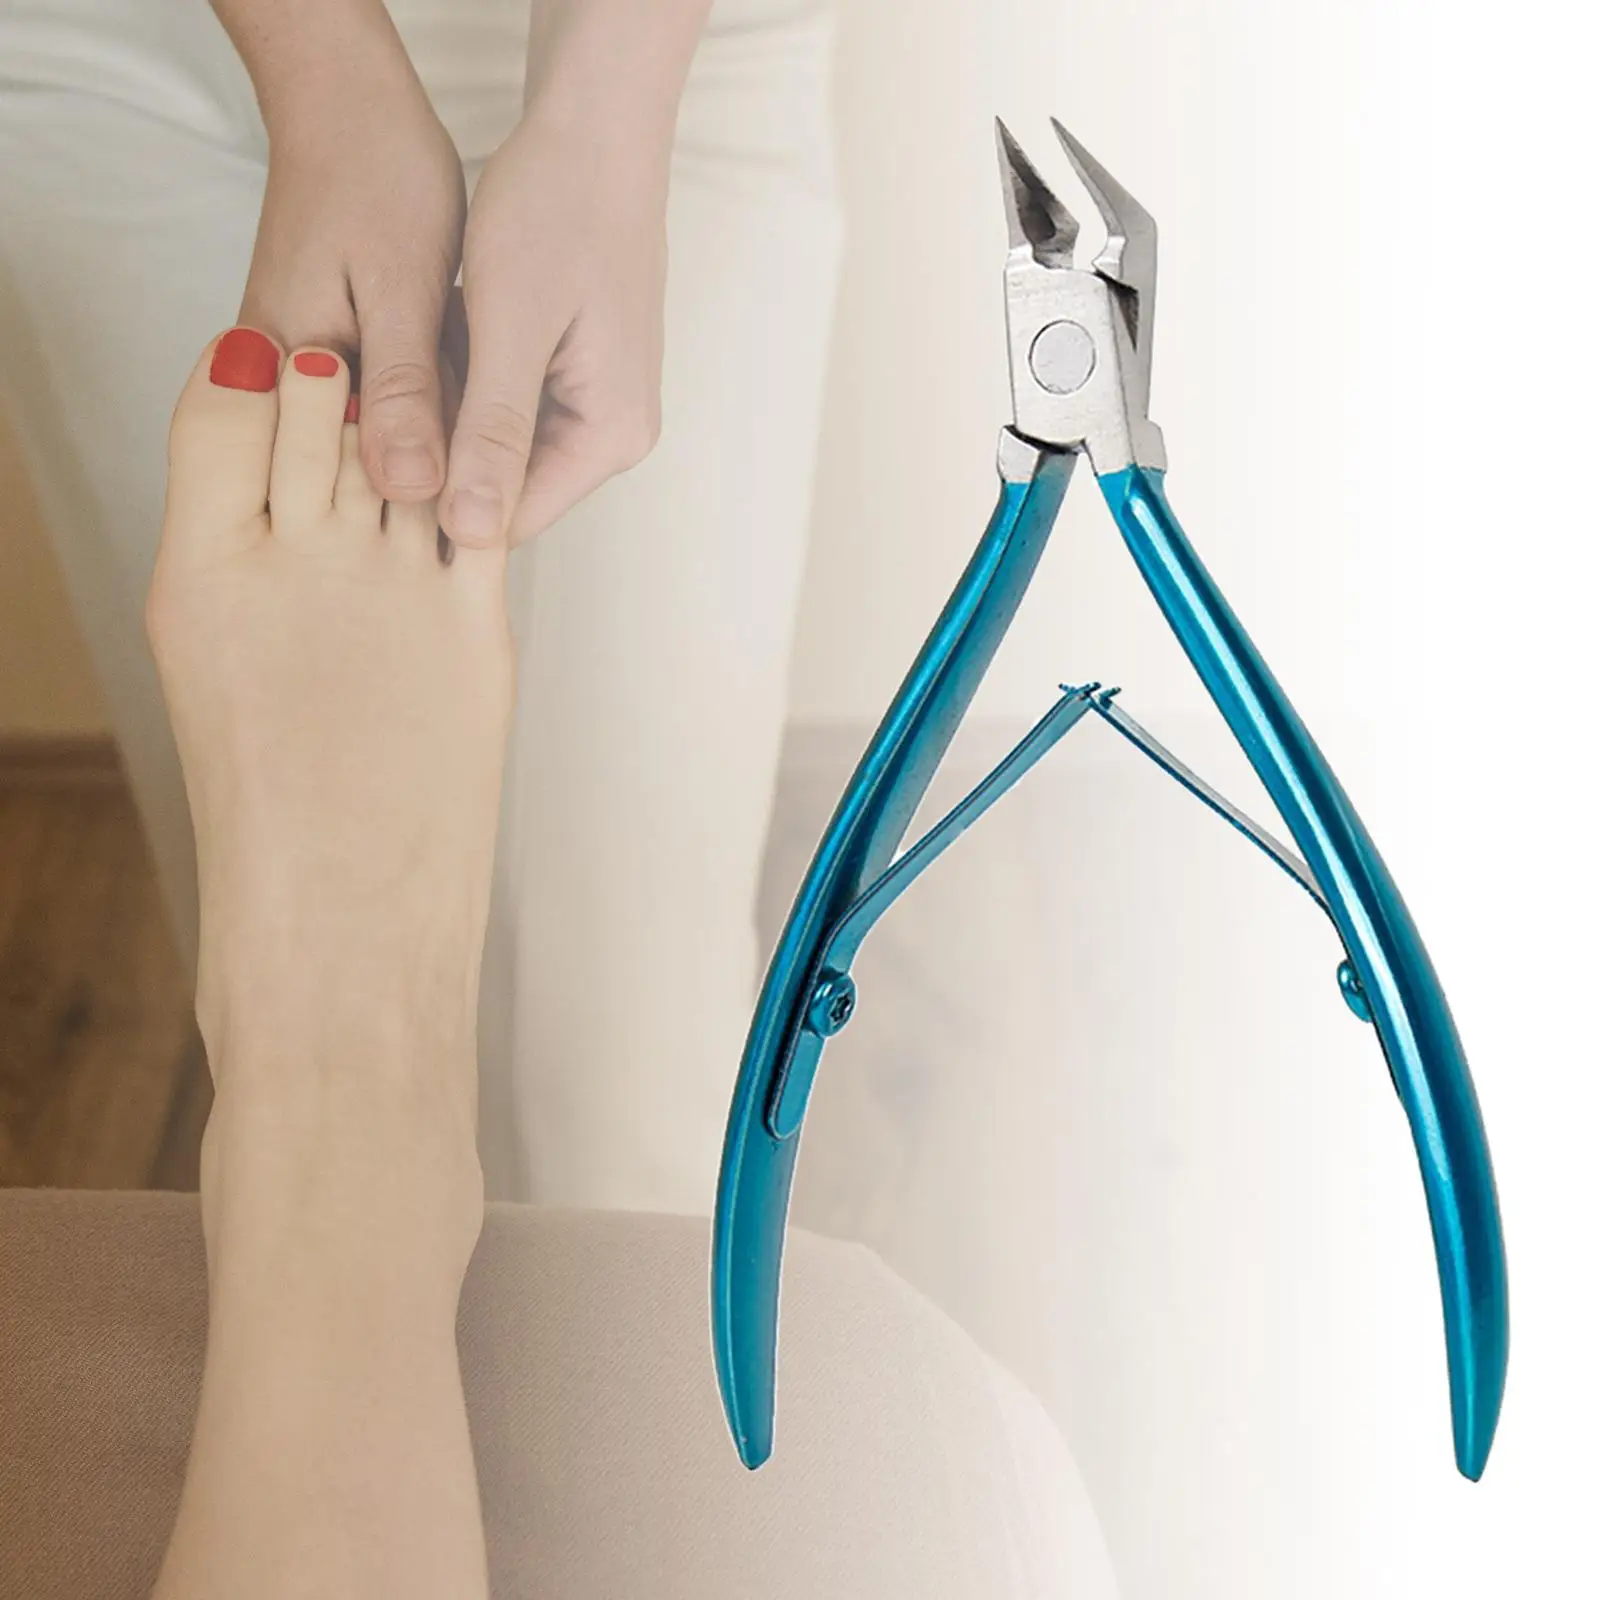 Professional Toenail clippers Rustproof Sharp Pointed Tip Stainless Steel Toenails Cutter for Salon Home Dead Skins Calluses SPA